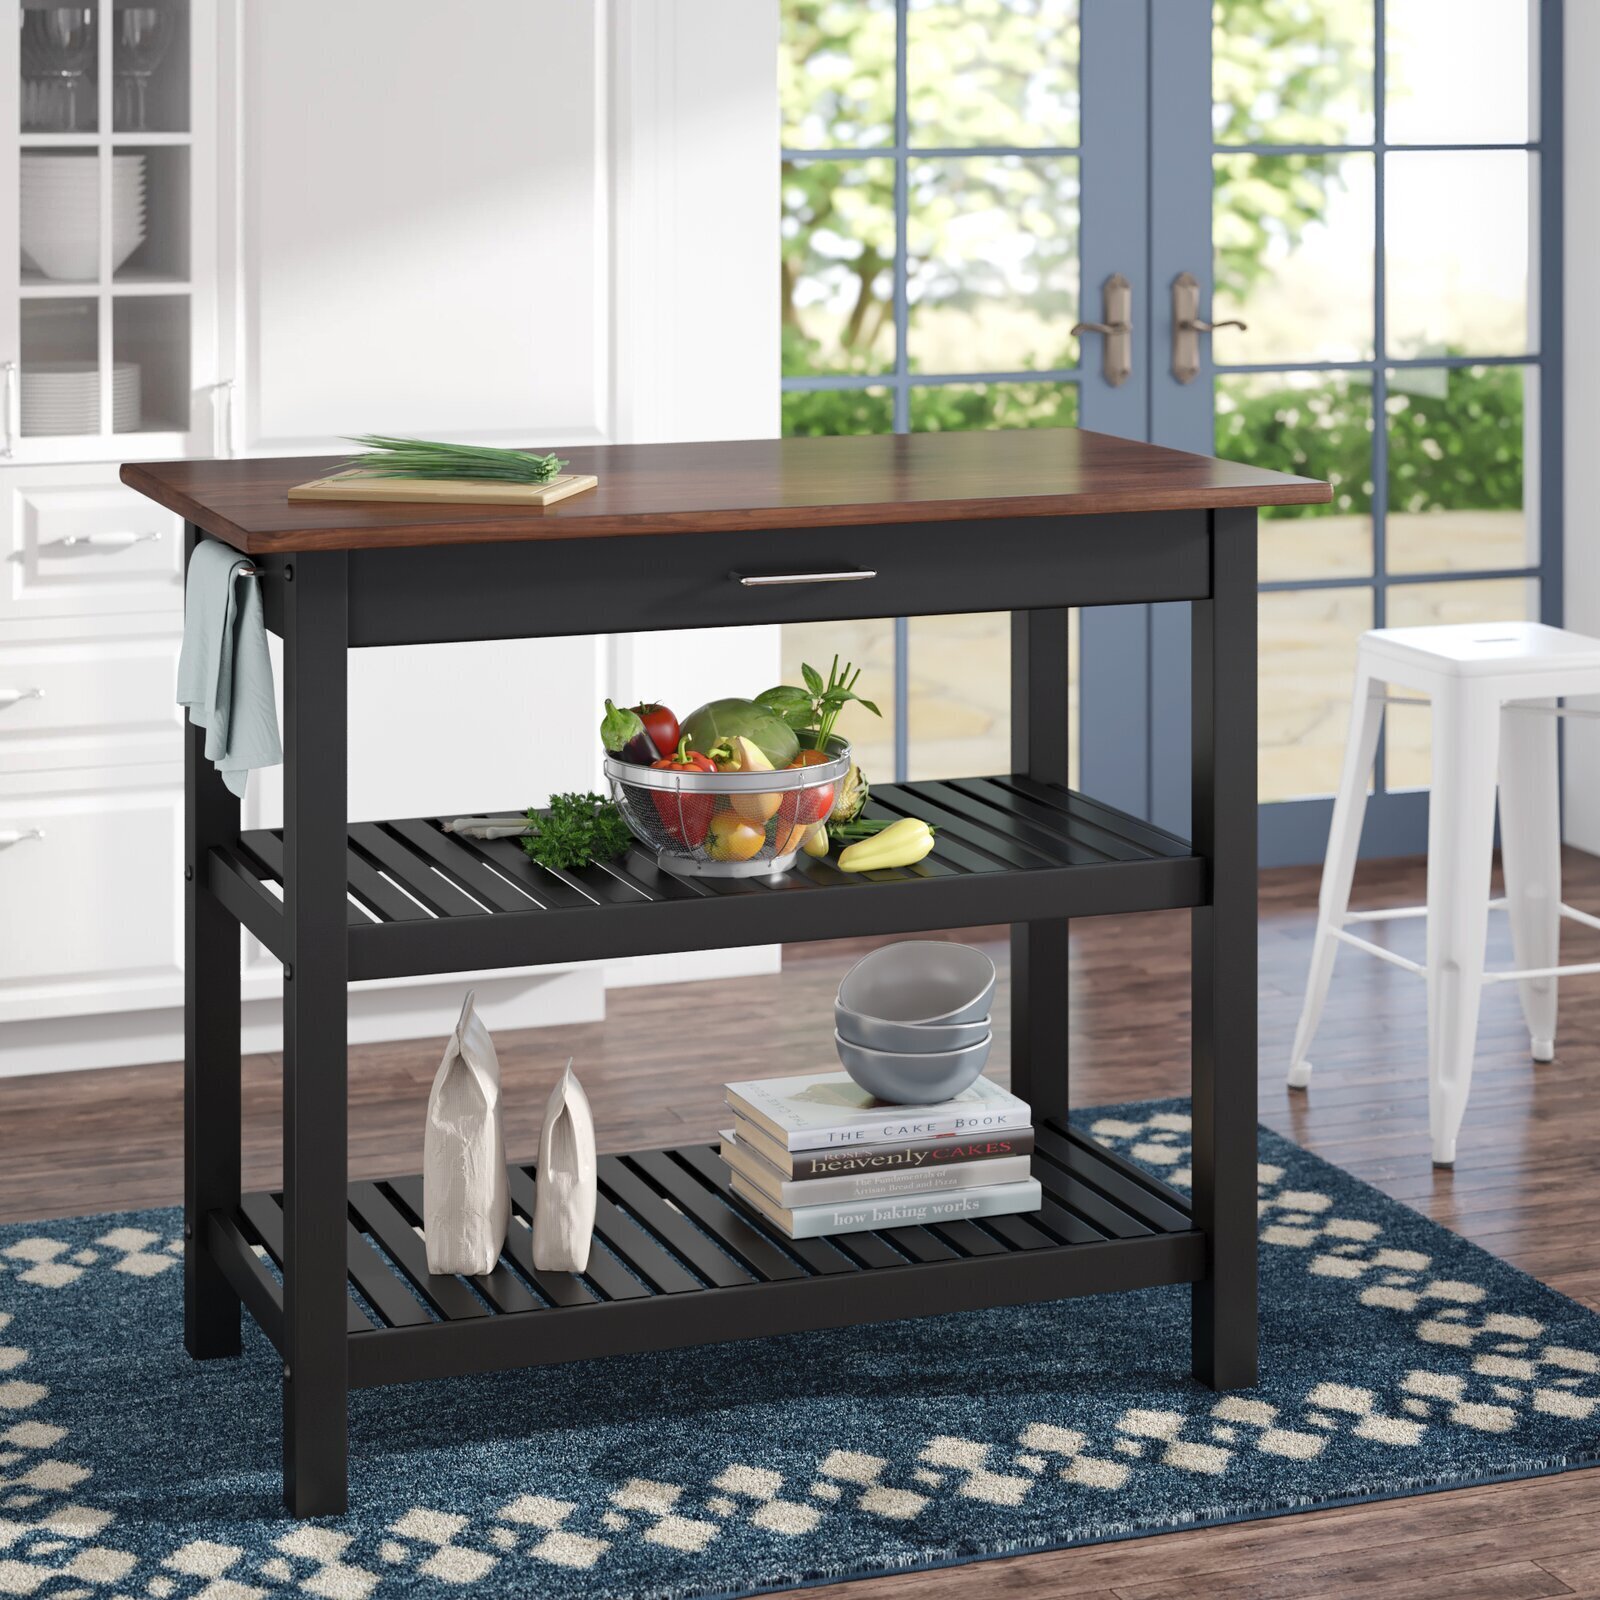 Kitchen cutting table with storage